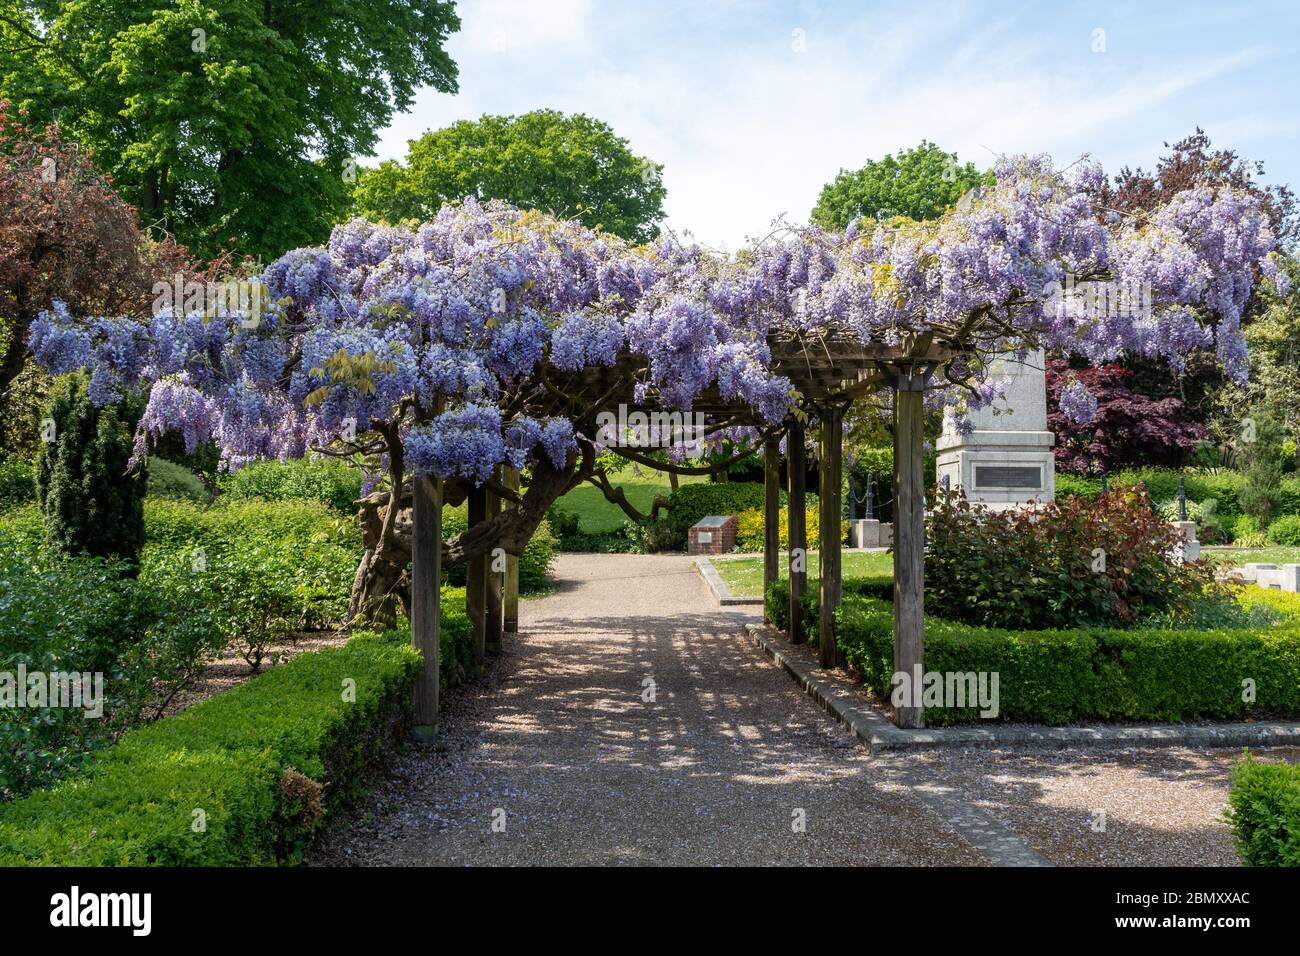 Wisteria covered pergola in flower in the Municipal Gardens in the Hampshire town of Aldershot during May, UK Stock Photo